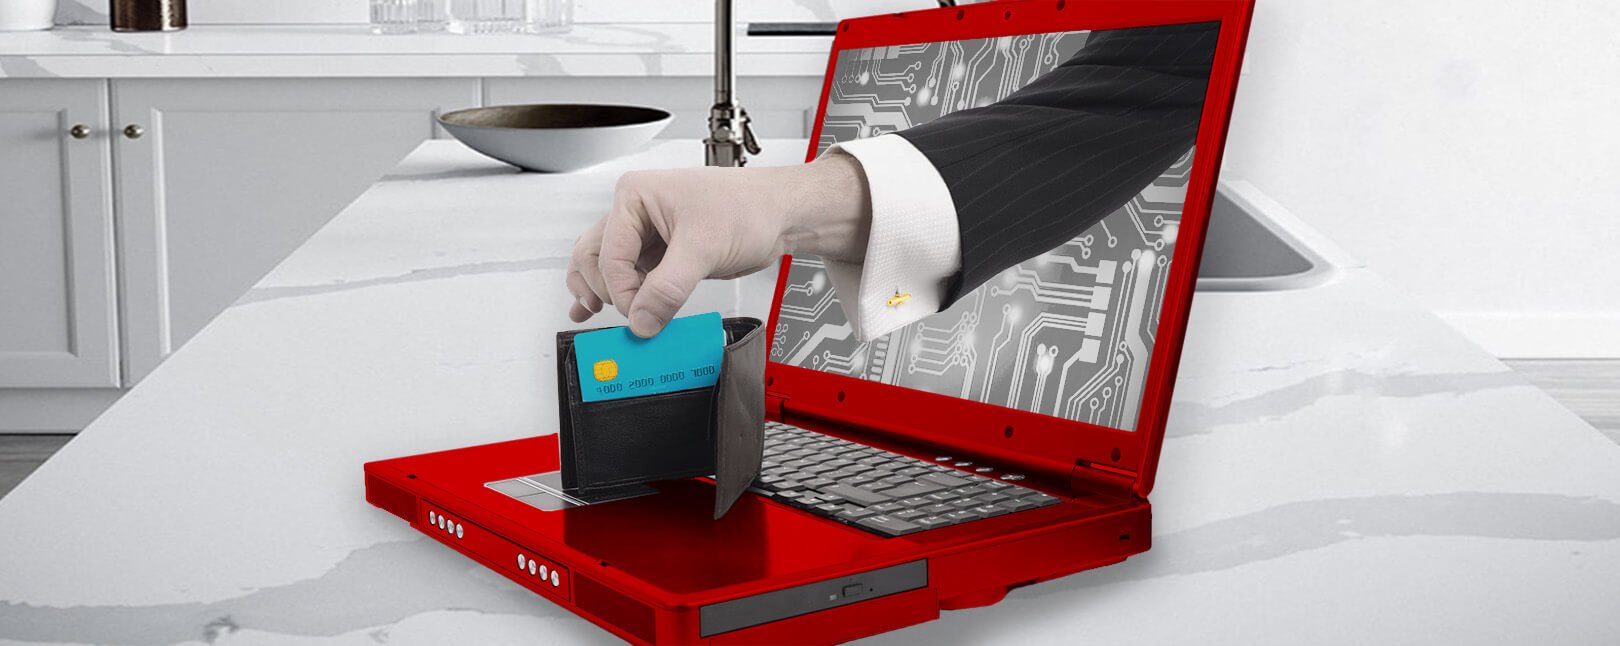 Types of eCommerce fraud: Classic Online Credit Card Fraud